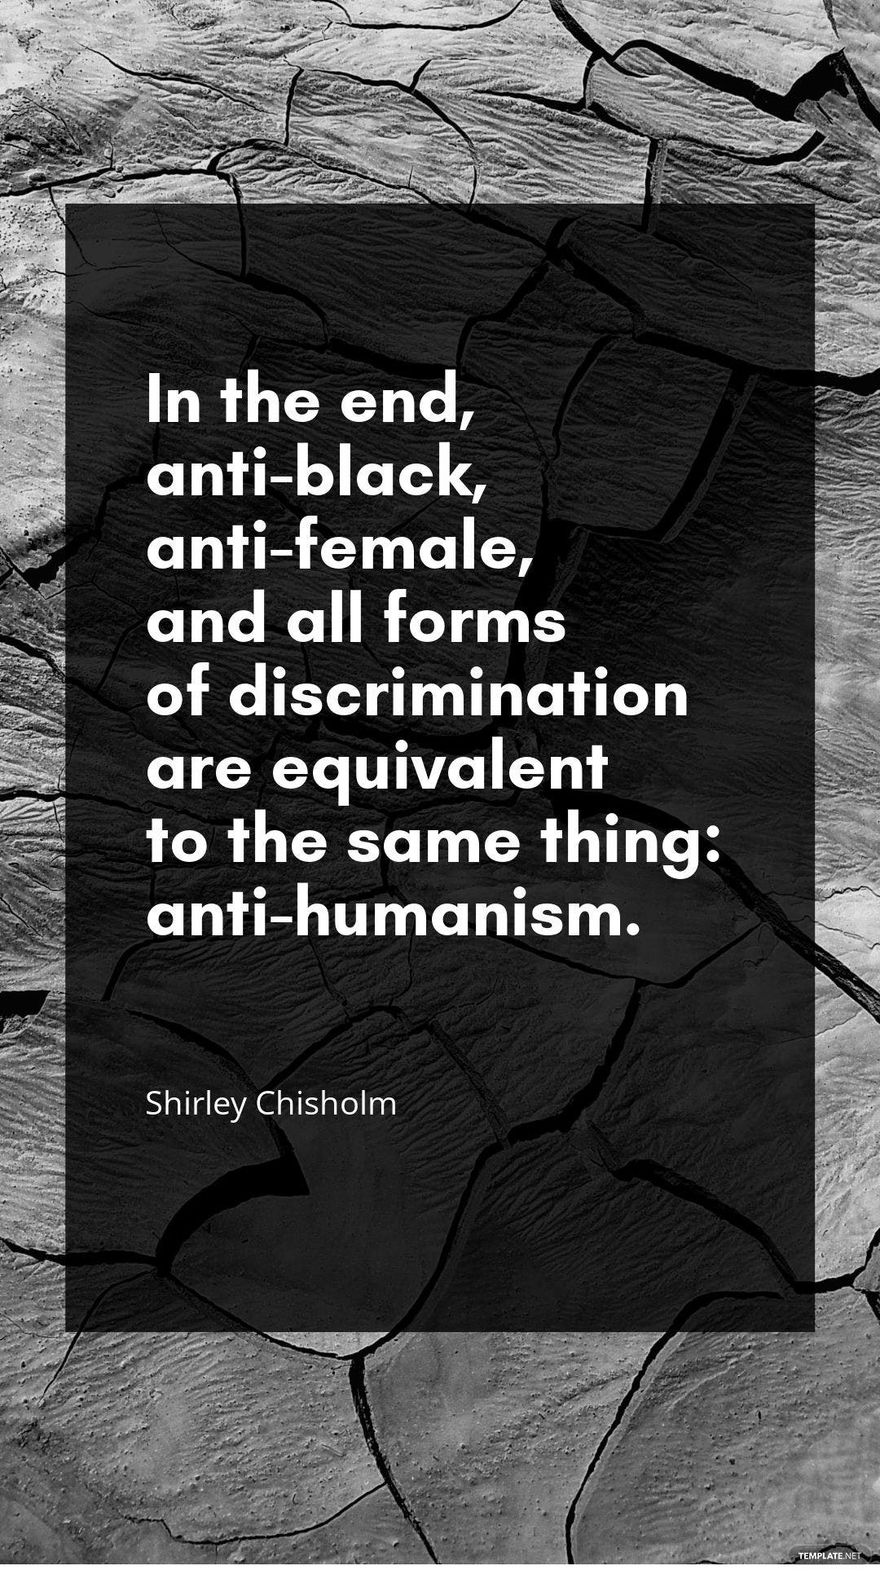 Shirley Chisholm - In the end, anti-black, anti-female, and all forms of discrimination are equivalent to the same thing: anti-humanism.